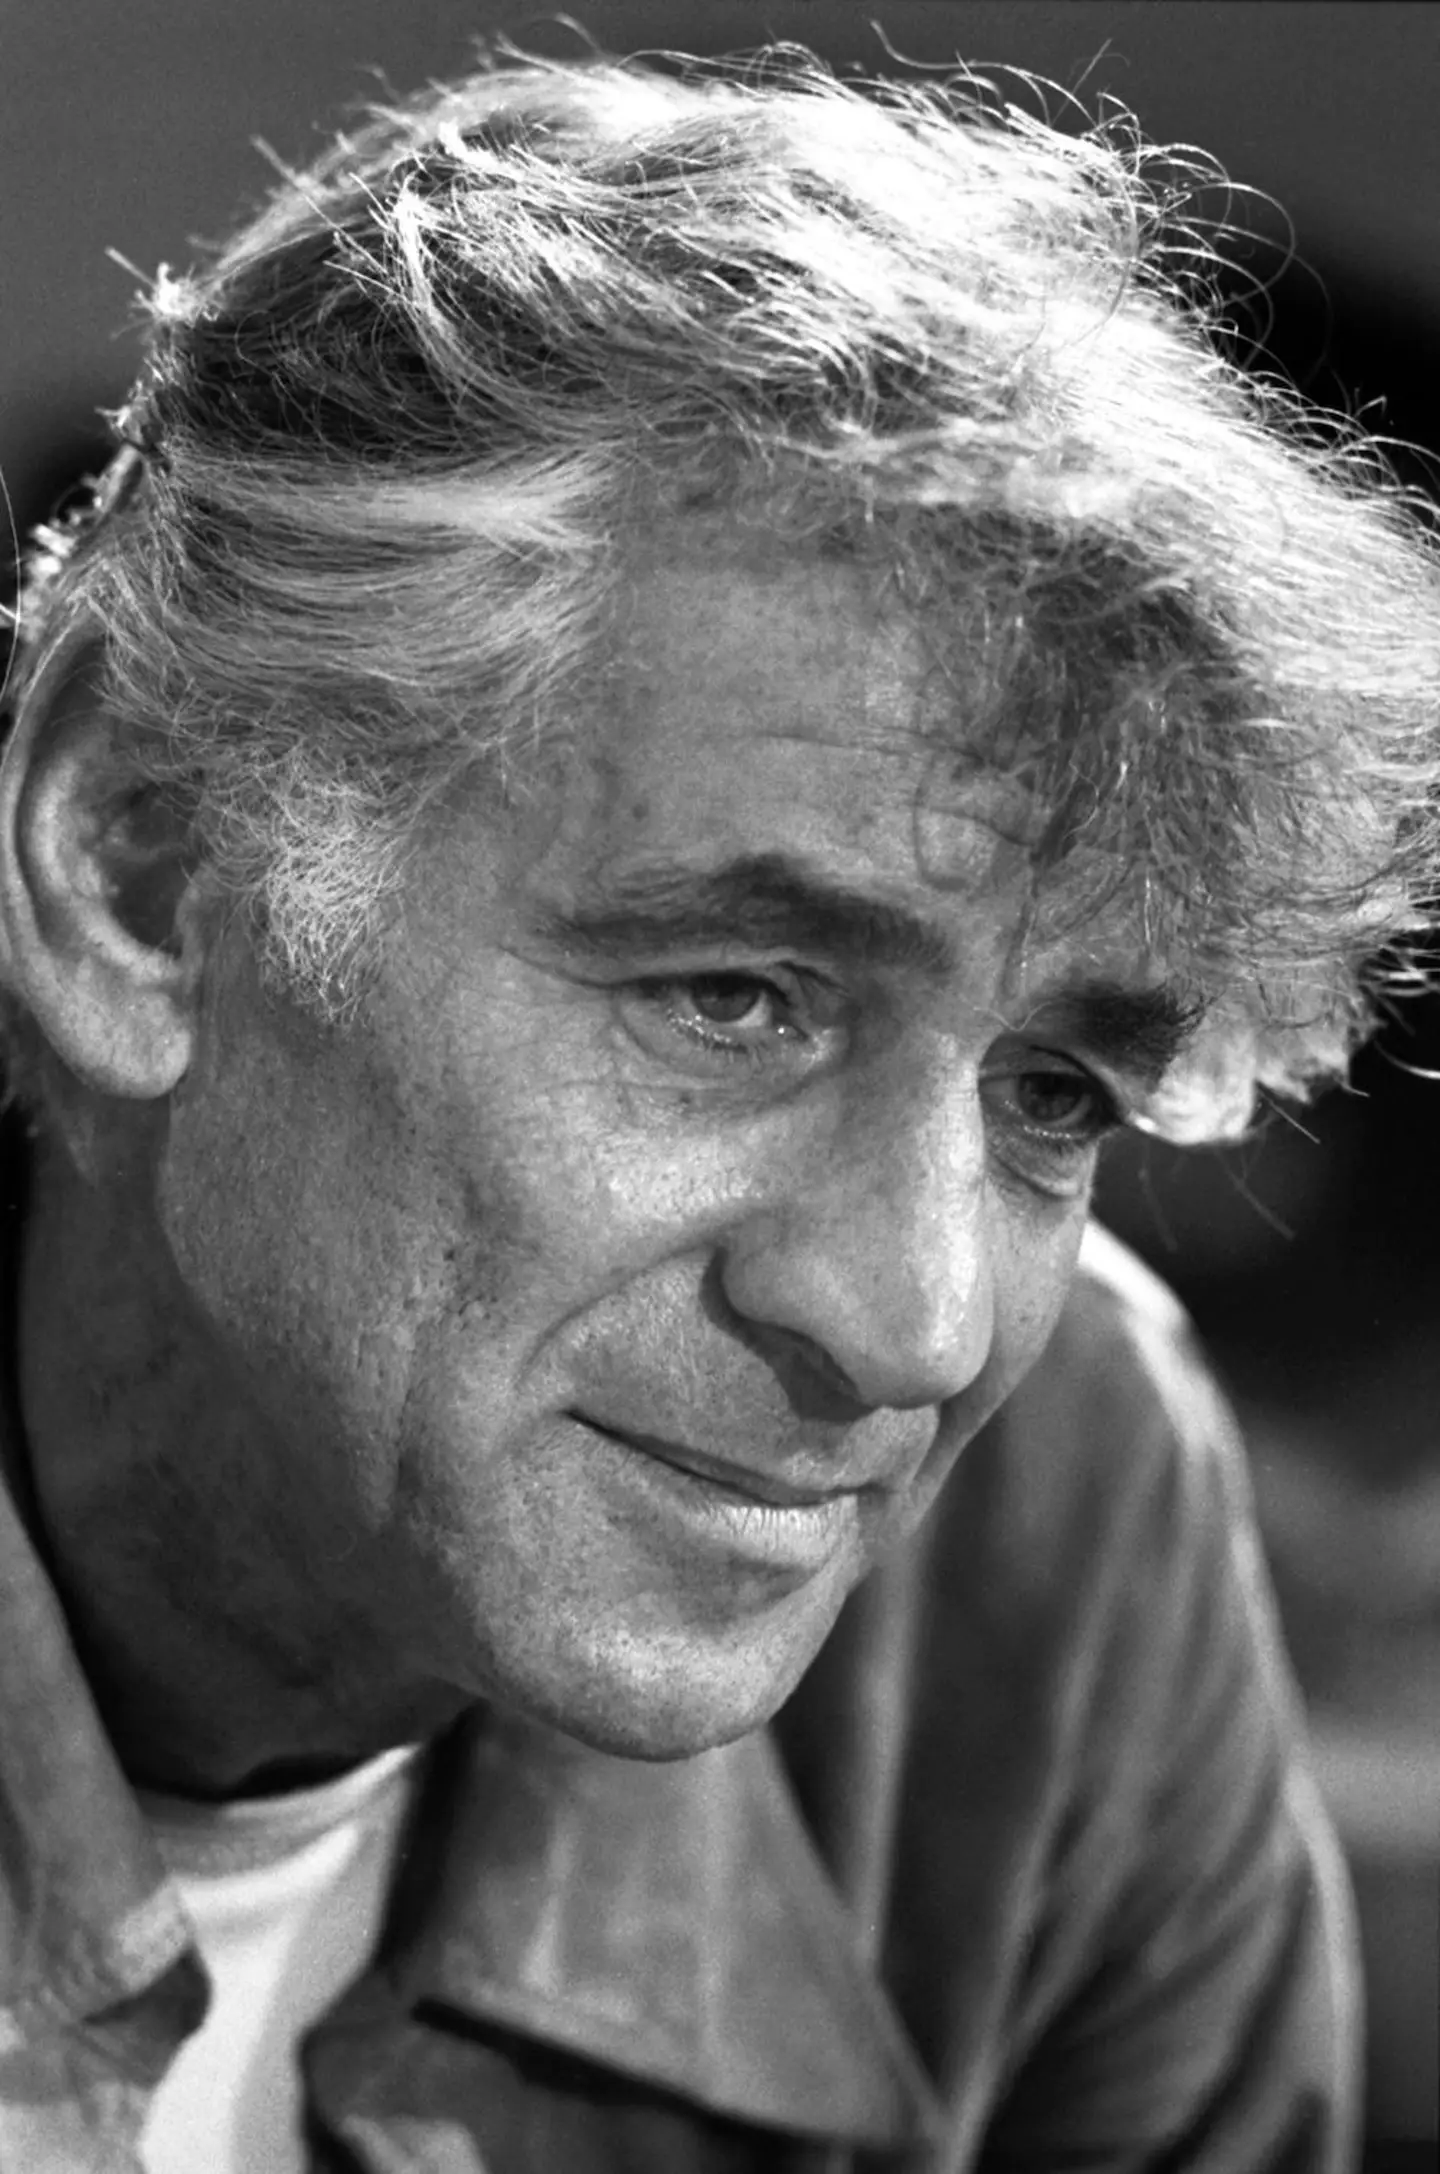 Maestro is about the world-renowned composer Leonard Bernstein.